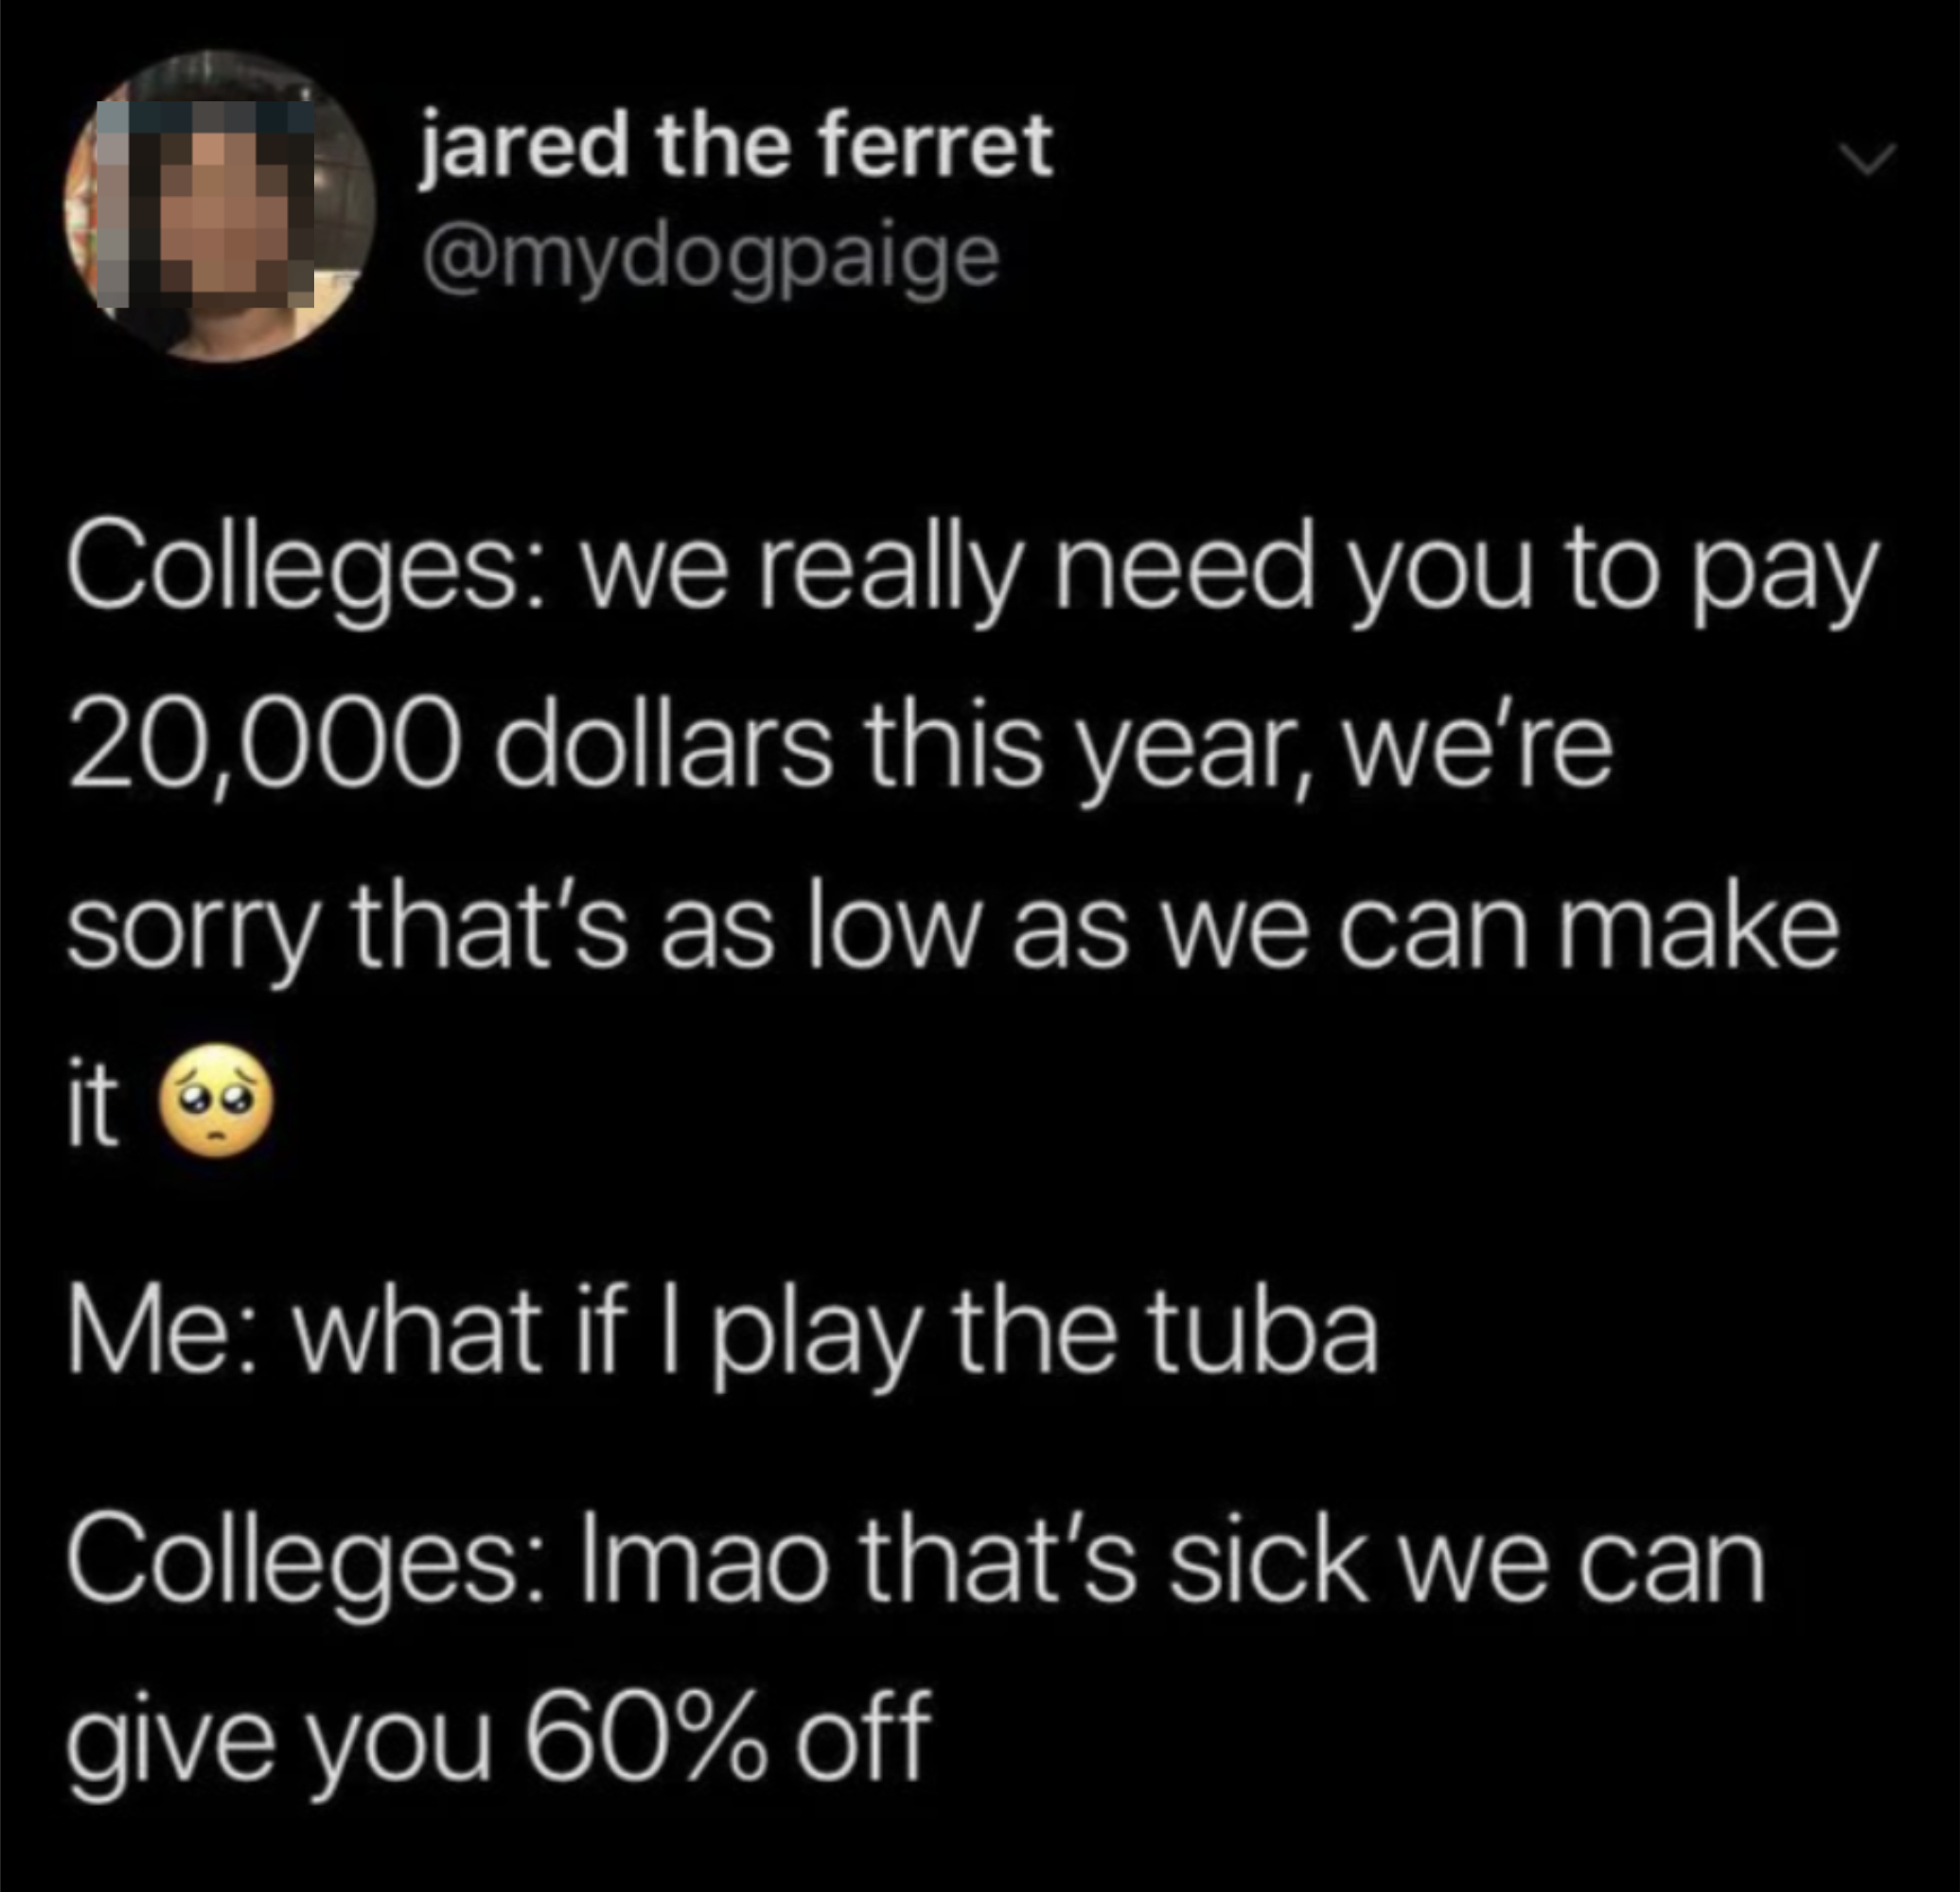 Meme with text exchange about lowering a 20,000 dollar payment by playing the tuba for a 60% discount